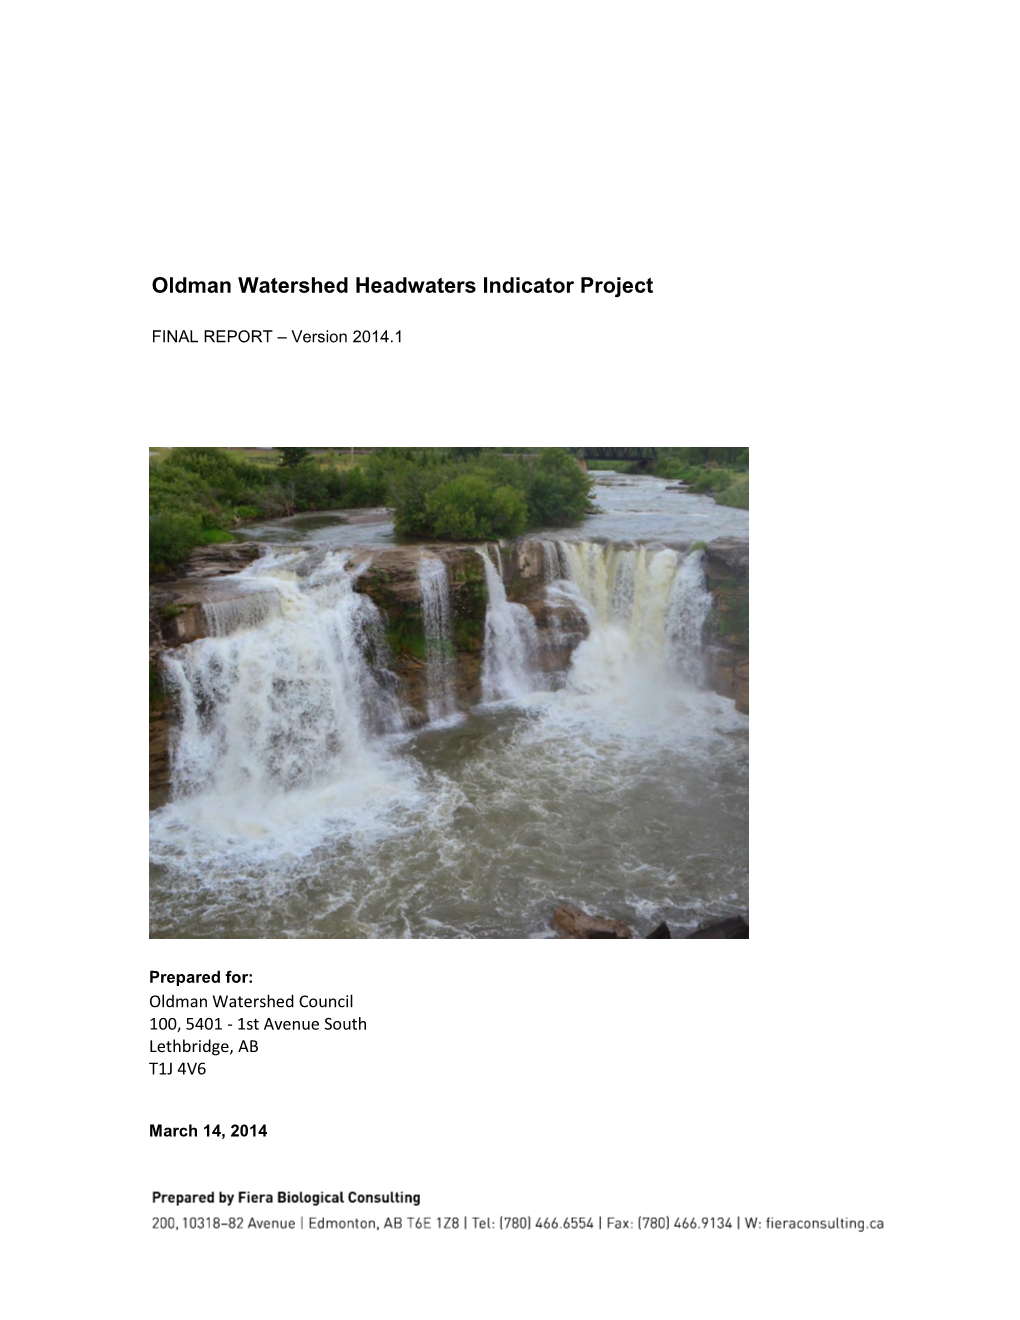 Oldman Watershed Headwaters Indicator Project – Final Report (Version 2014.1)